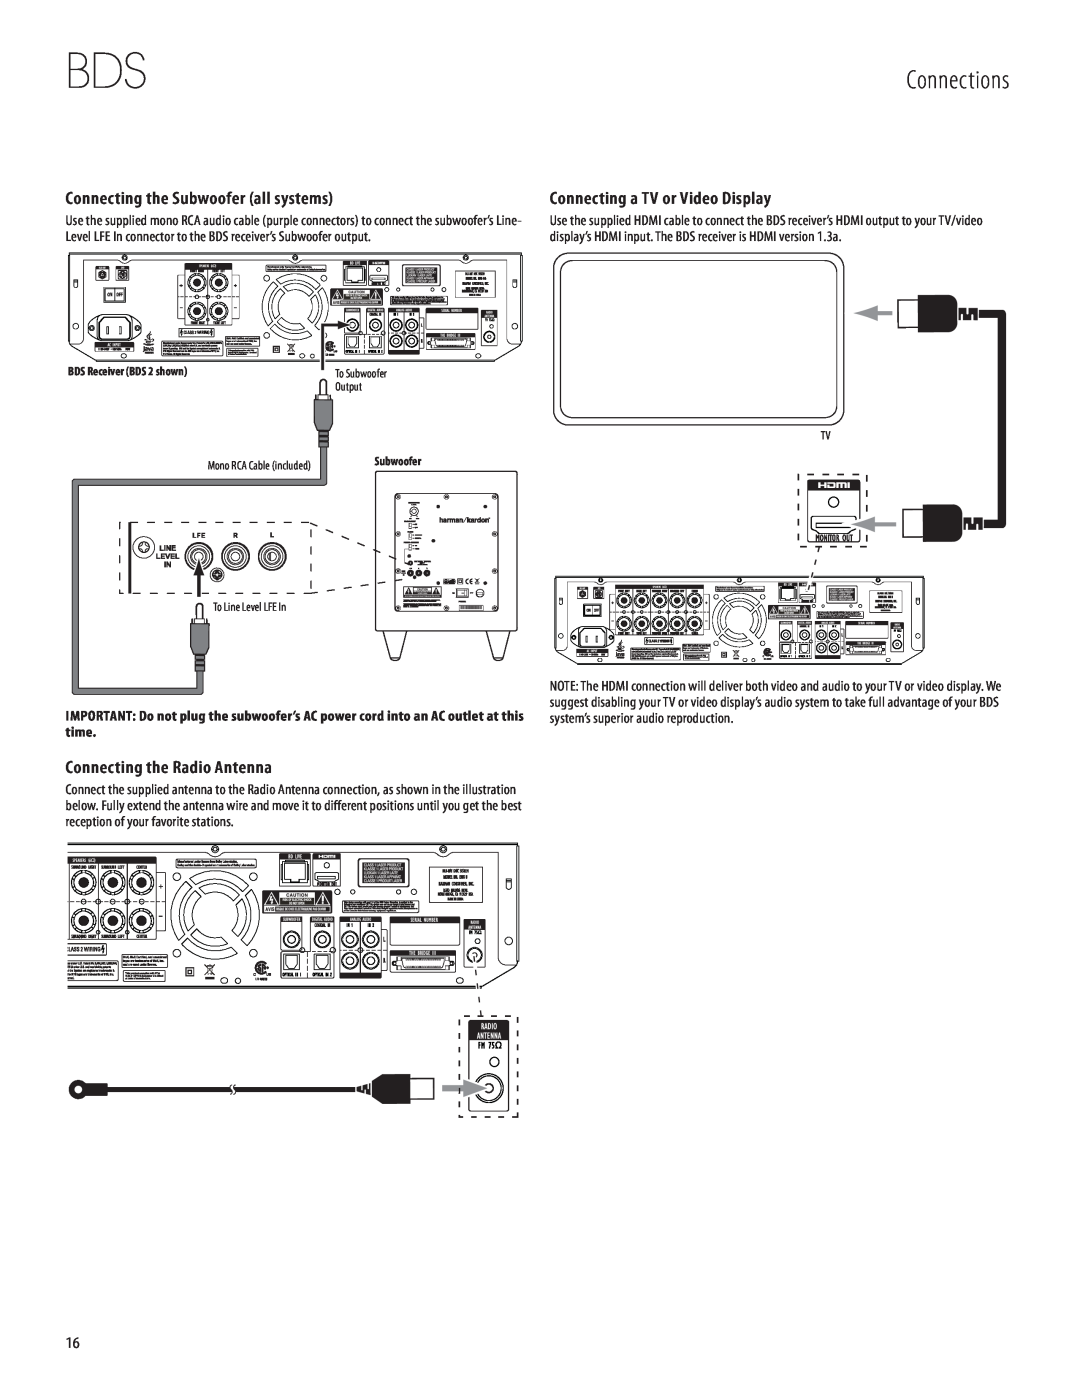 Harman-Kardon 950-0321-001 owner manual Connections, Connecting the Subwoofer all systems, Connecting a TV or Video Display 